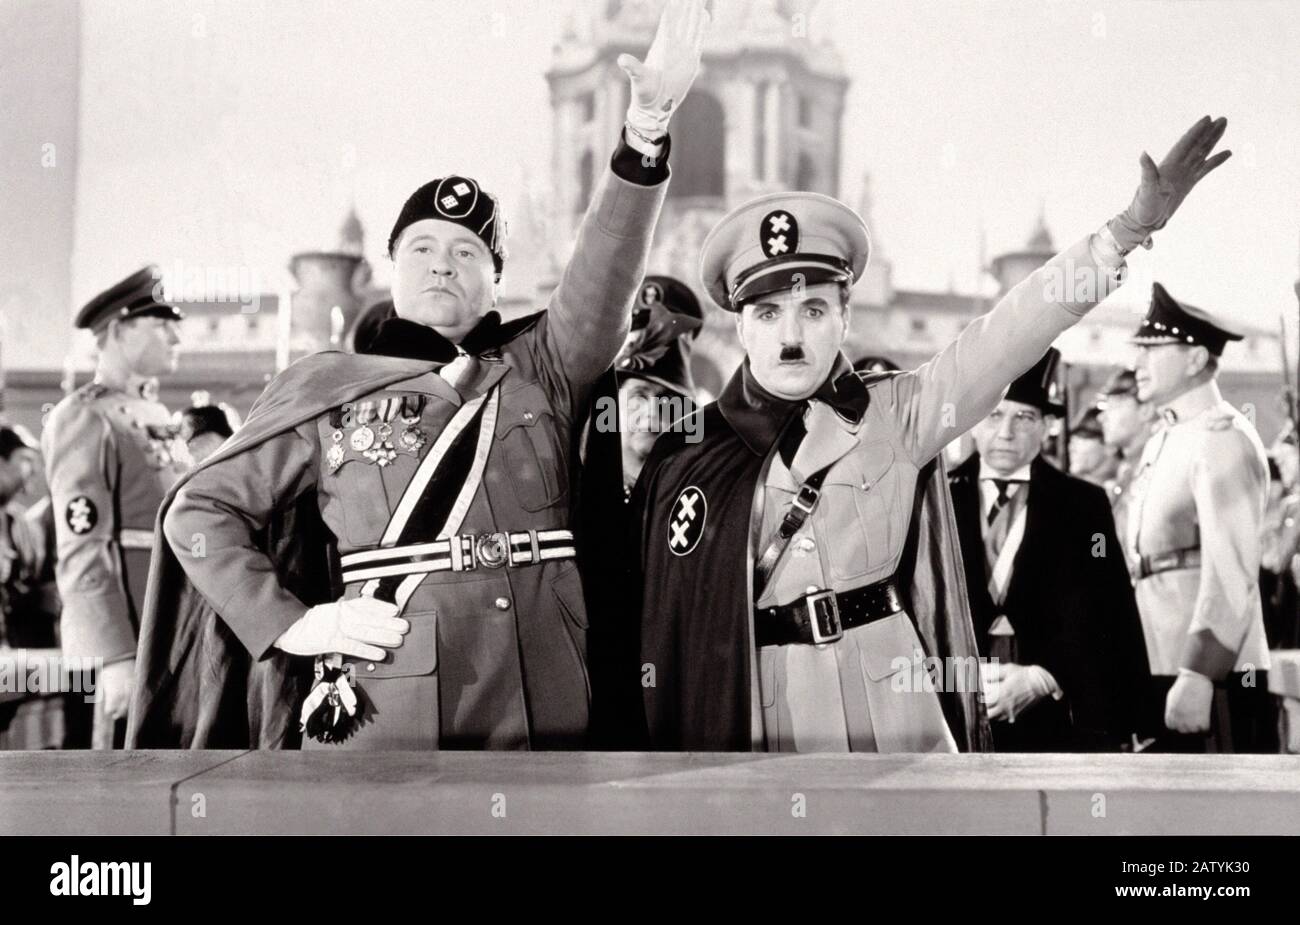 CHARLES  CHAPLIN ( 1889 - 1977 ) with Jack Oakie , Hitler and Mussolini in THE GREAT DICTATOR ( 1940 - Il grande dittatore ) - military uniform - unif Stock Photo